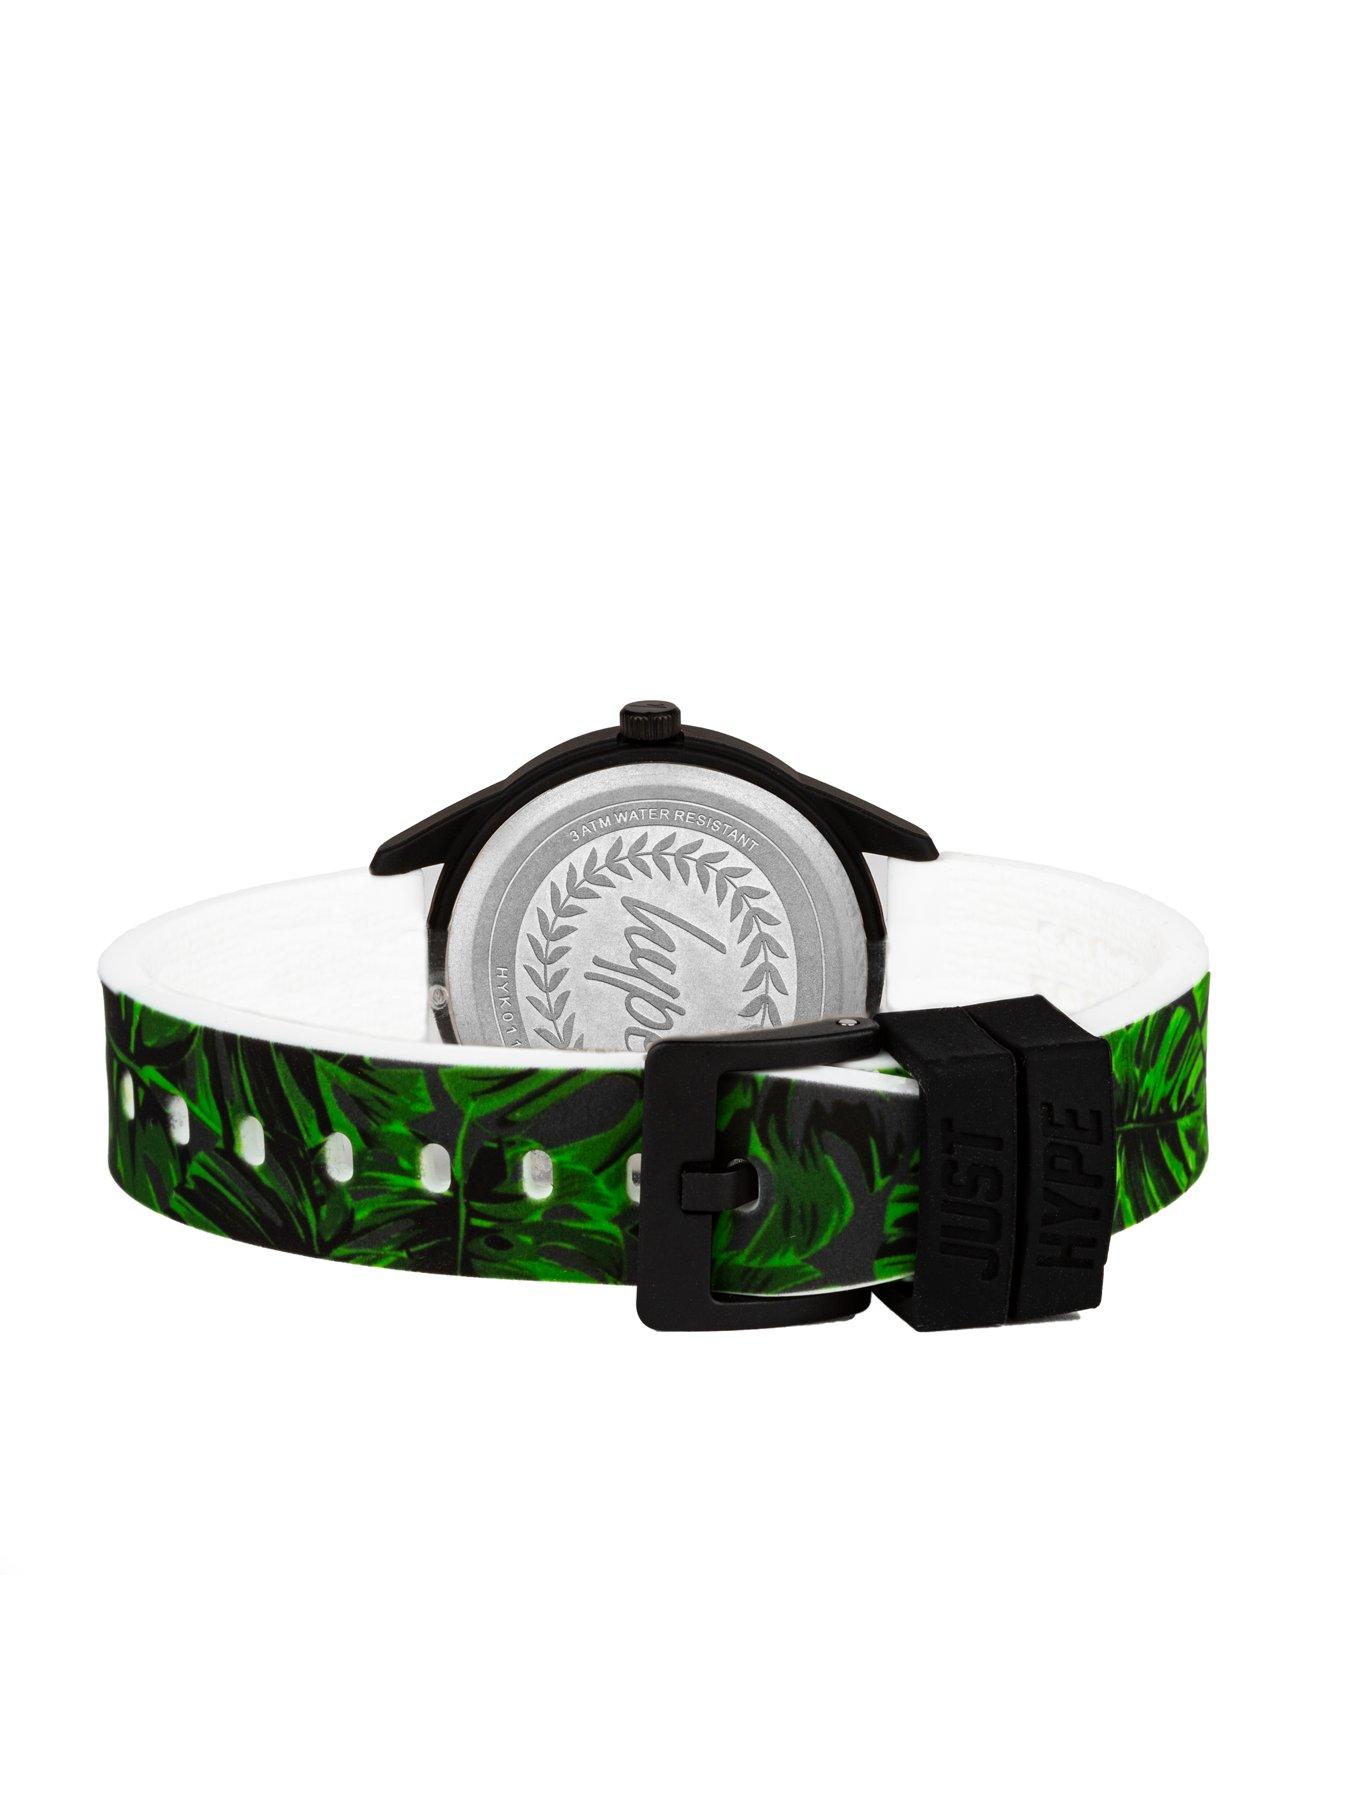  Hype Kids Green Leaf Pattern Silicone Strap with Black Dial